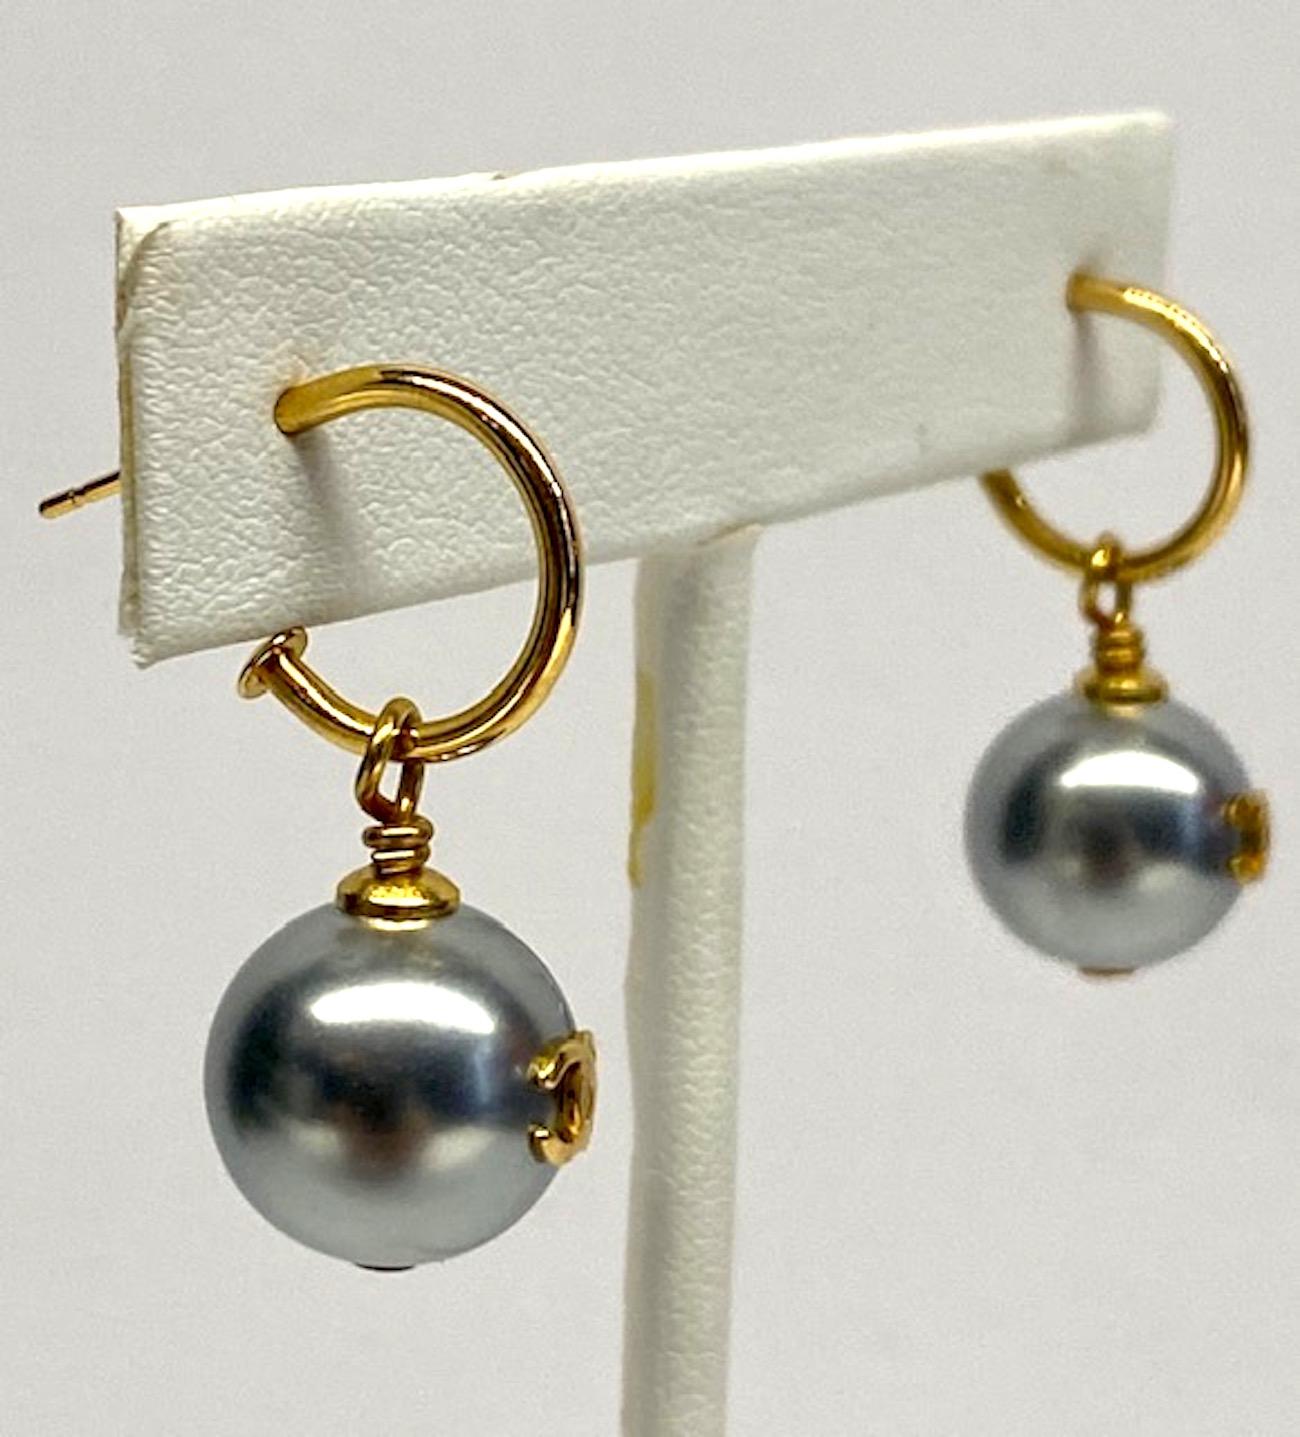 A classic pair of Chanel grey pearl dangle earrings. Each faux pearl is 12 mm (a half inch in diameter) in size, has the iconic Chanel interlocking CC logo in the front and hangs from a shiny gold hoop for pierced ears. The pearl may be removed to